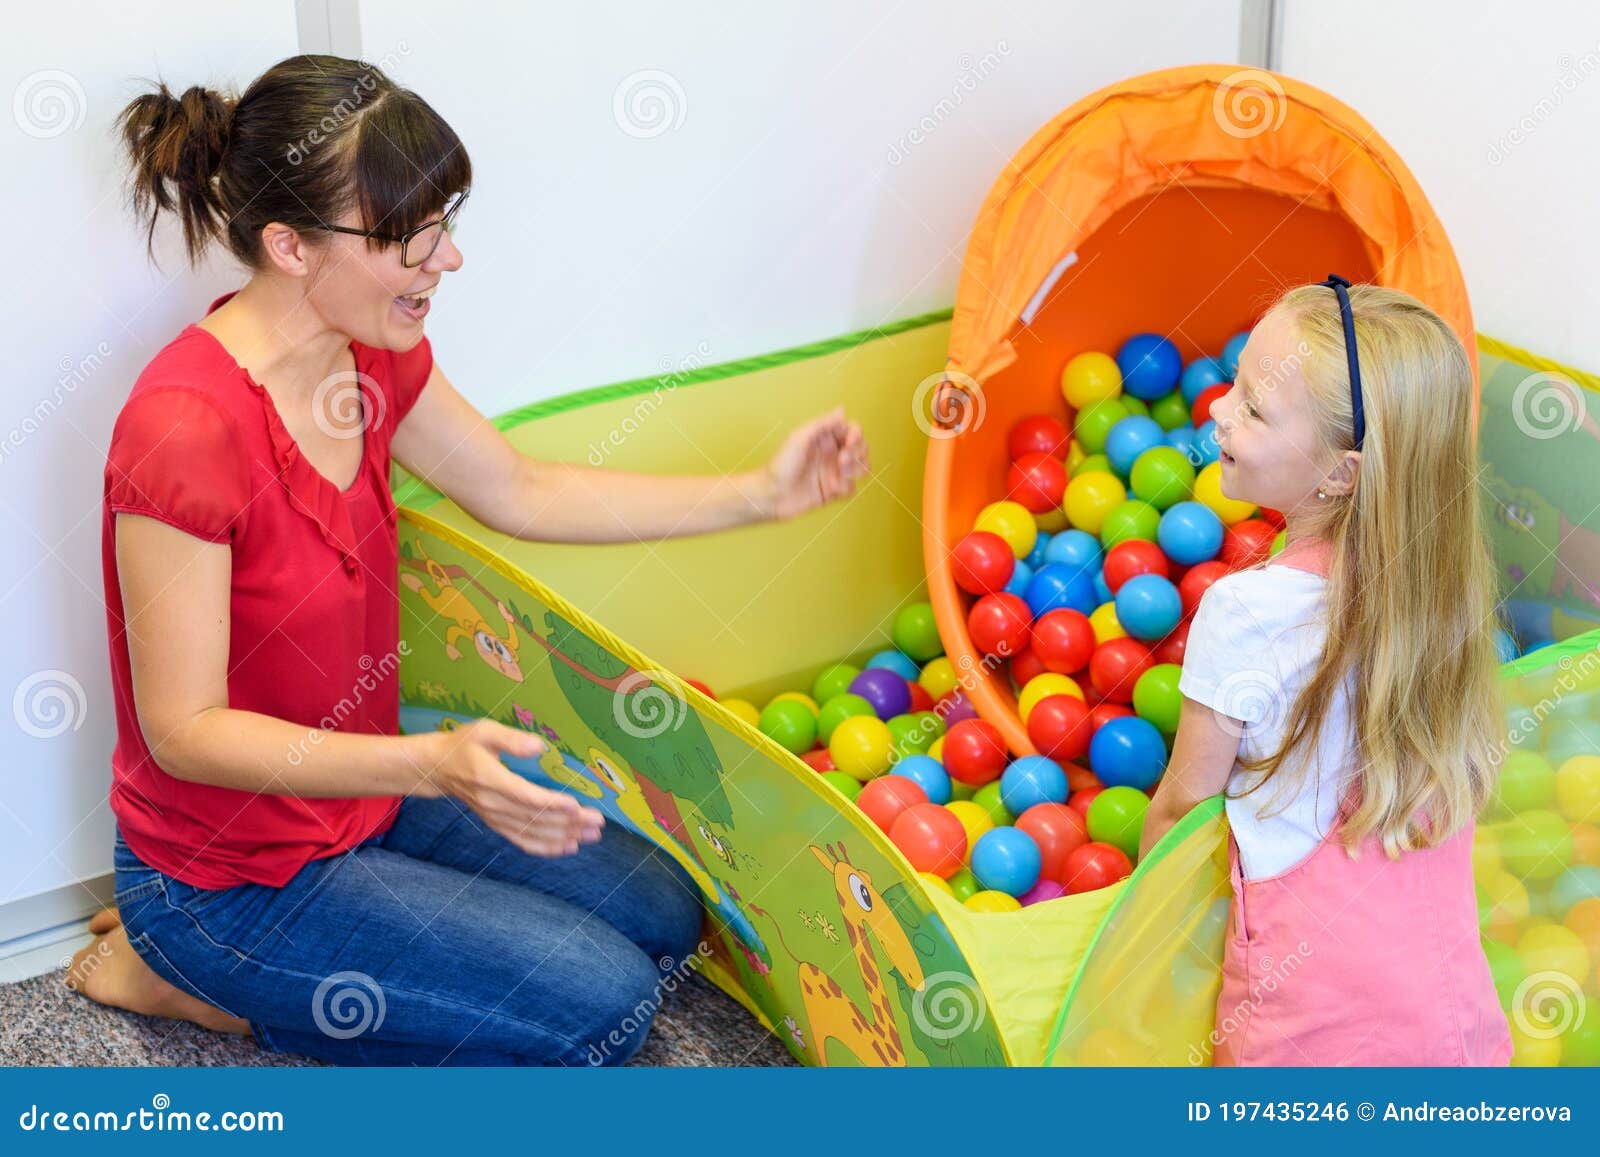 toddler girl in child occupational therapy session doing playful exercises with her therapist.